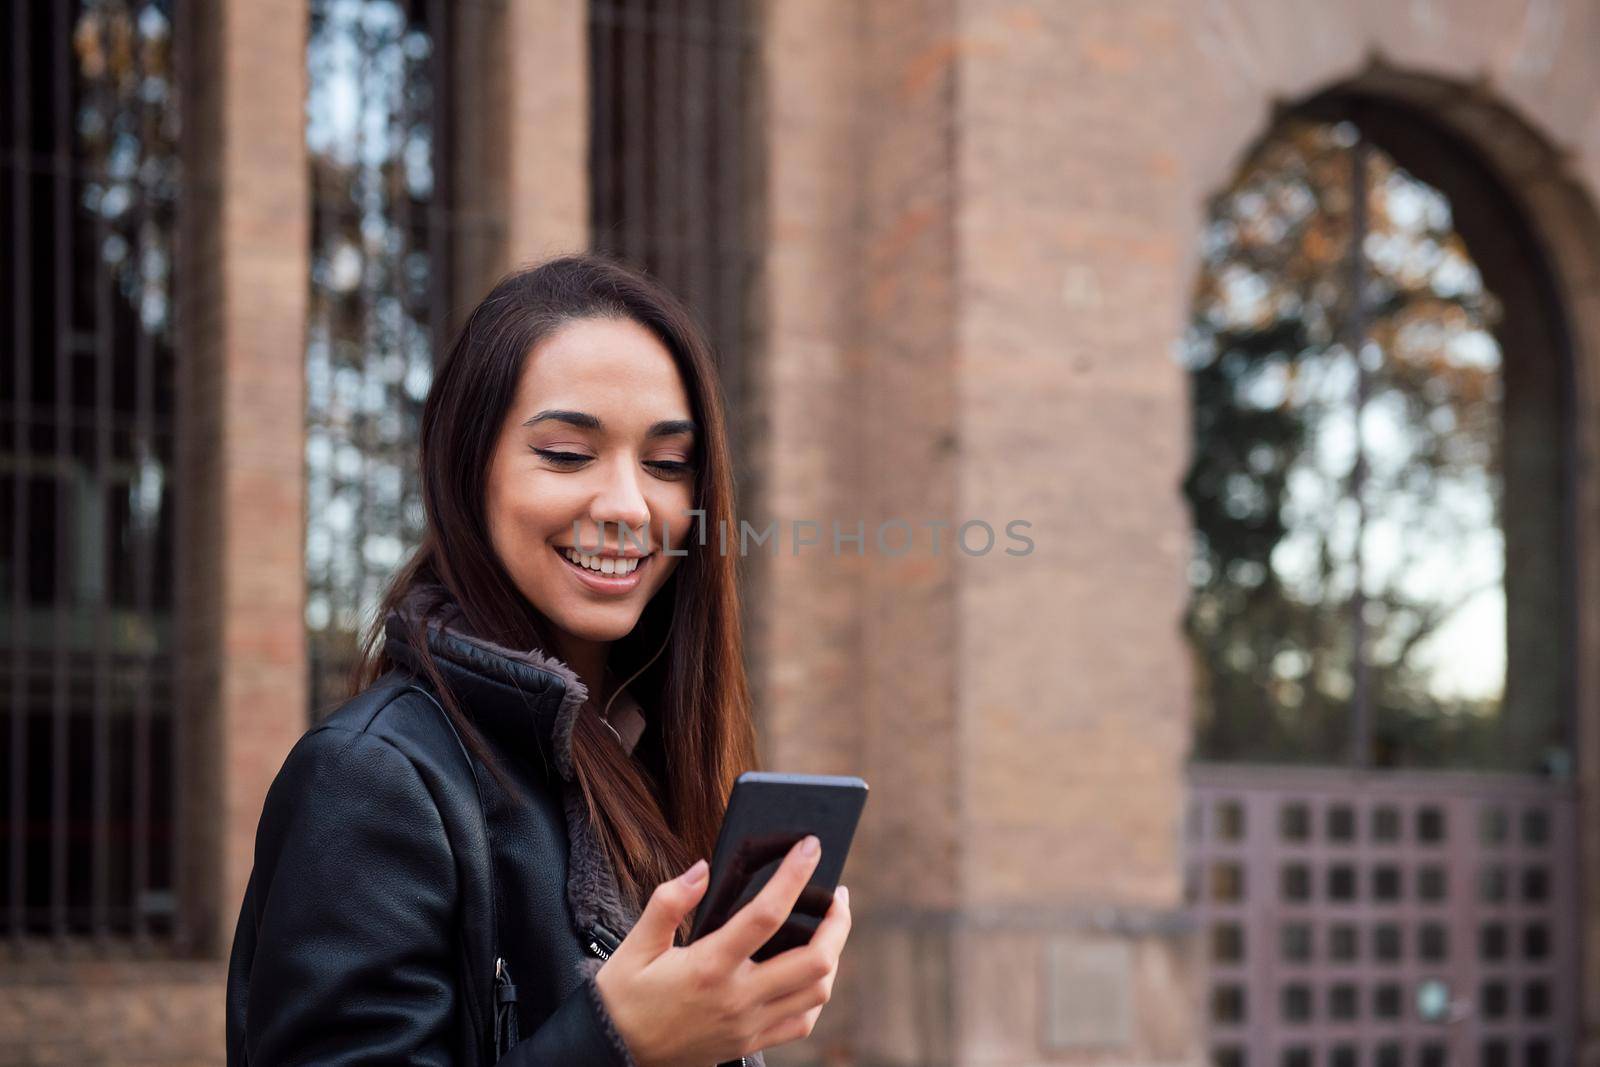 smiling woman looking at her phone at the street by raulmelldo